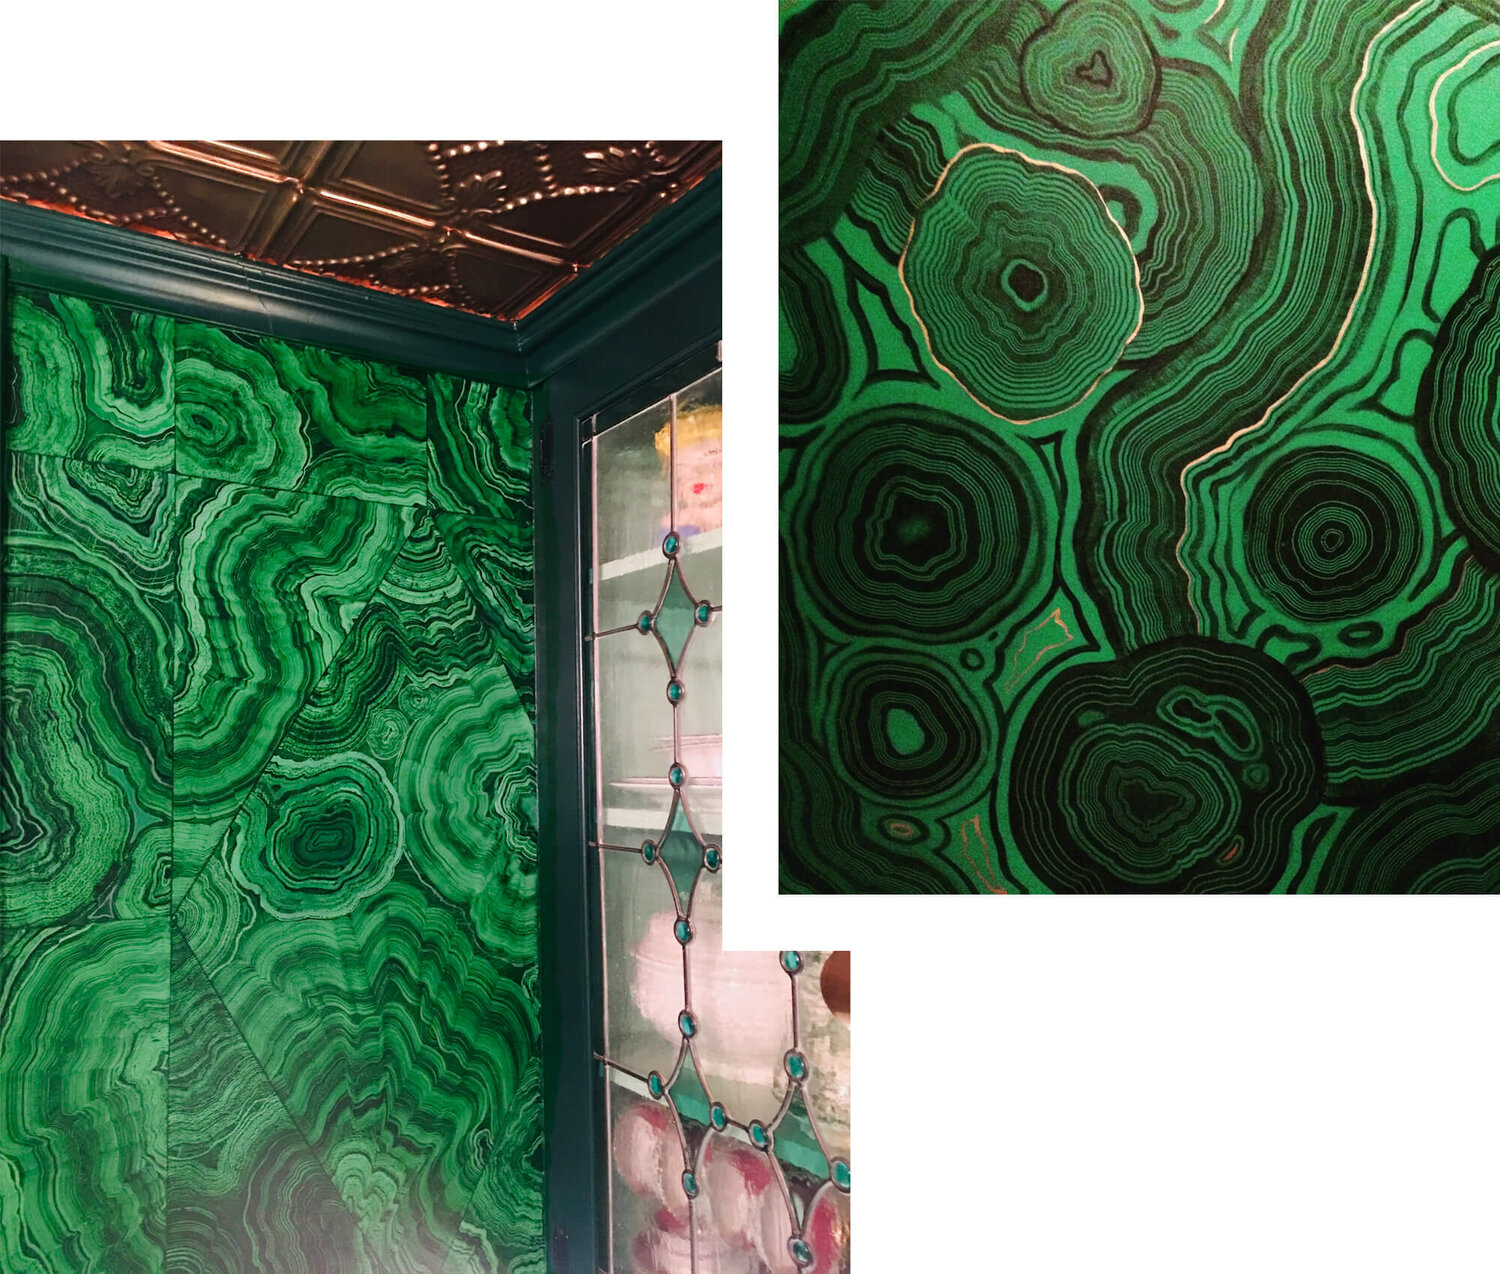 Copper ceilinged space with malachite patterned walls and a leaded glass window. Adjacent picture is of malachite pattern.